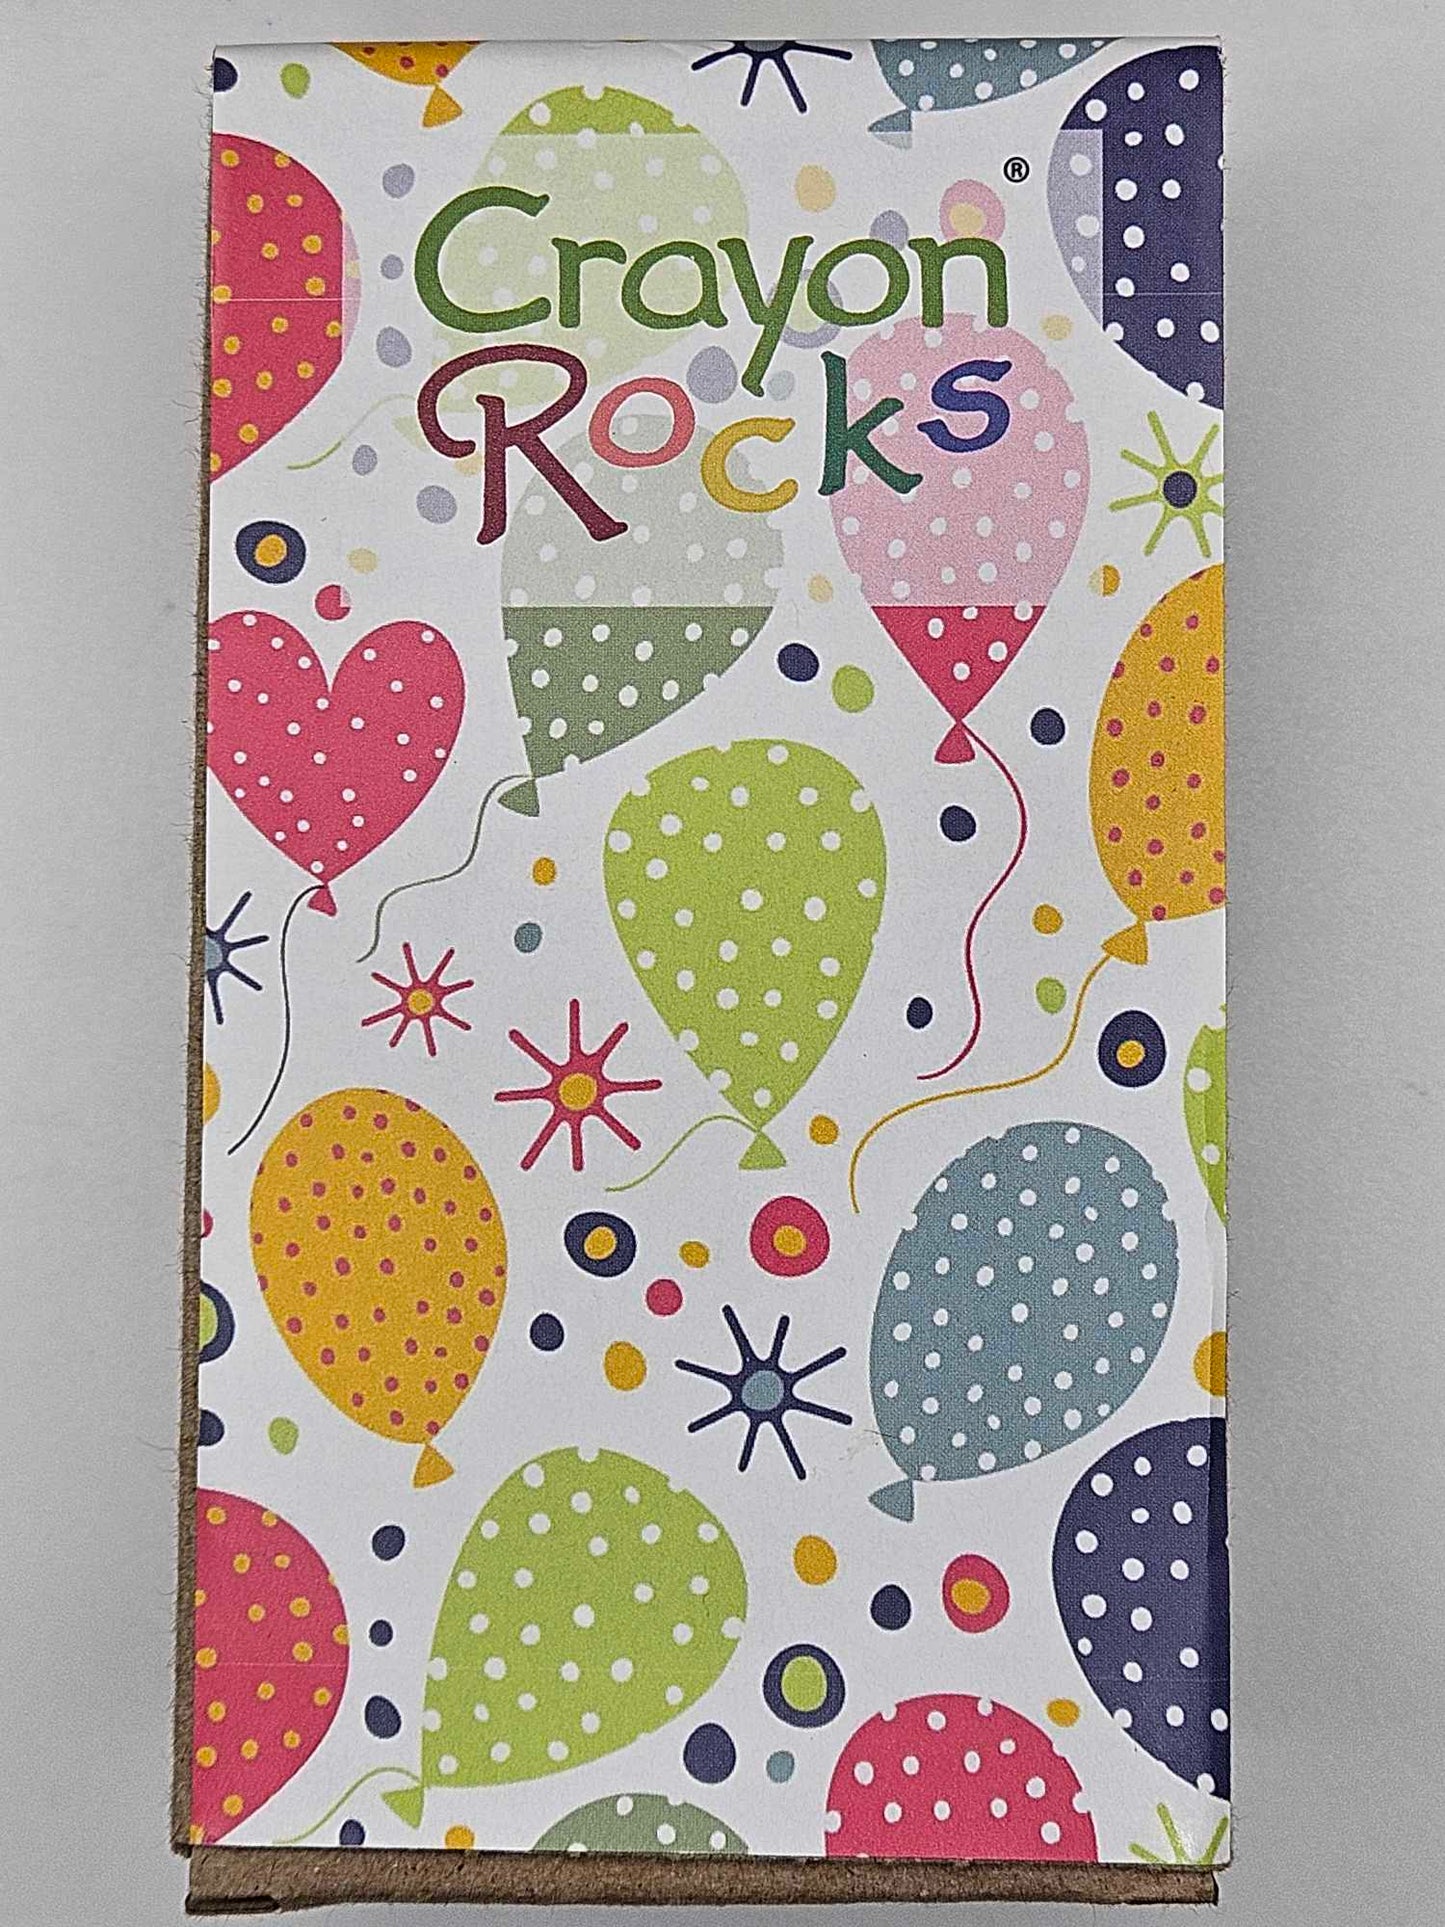 Crayons-ROCKS! Let's Play with ROCKS